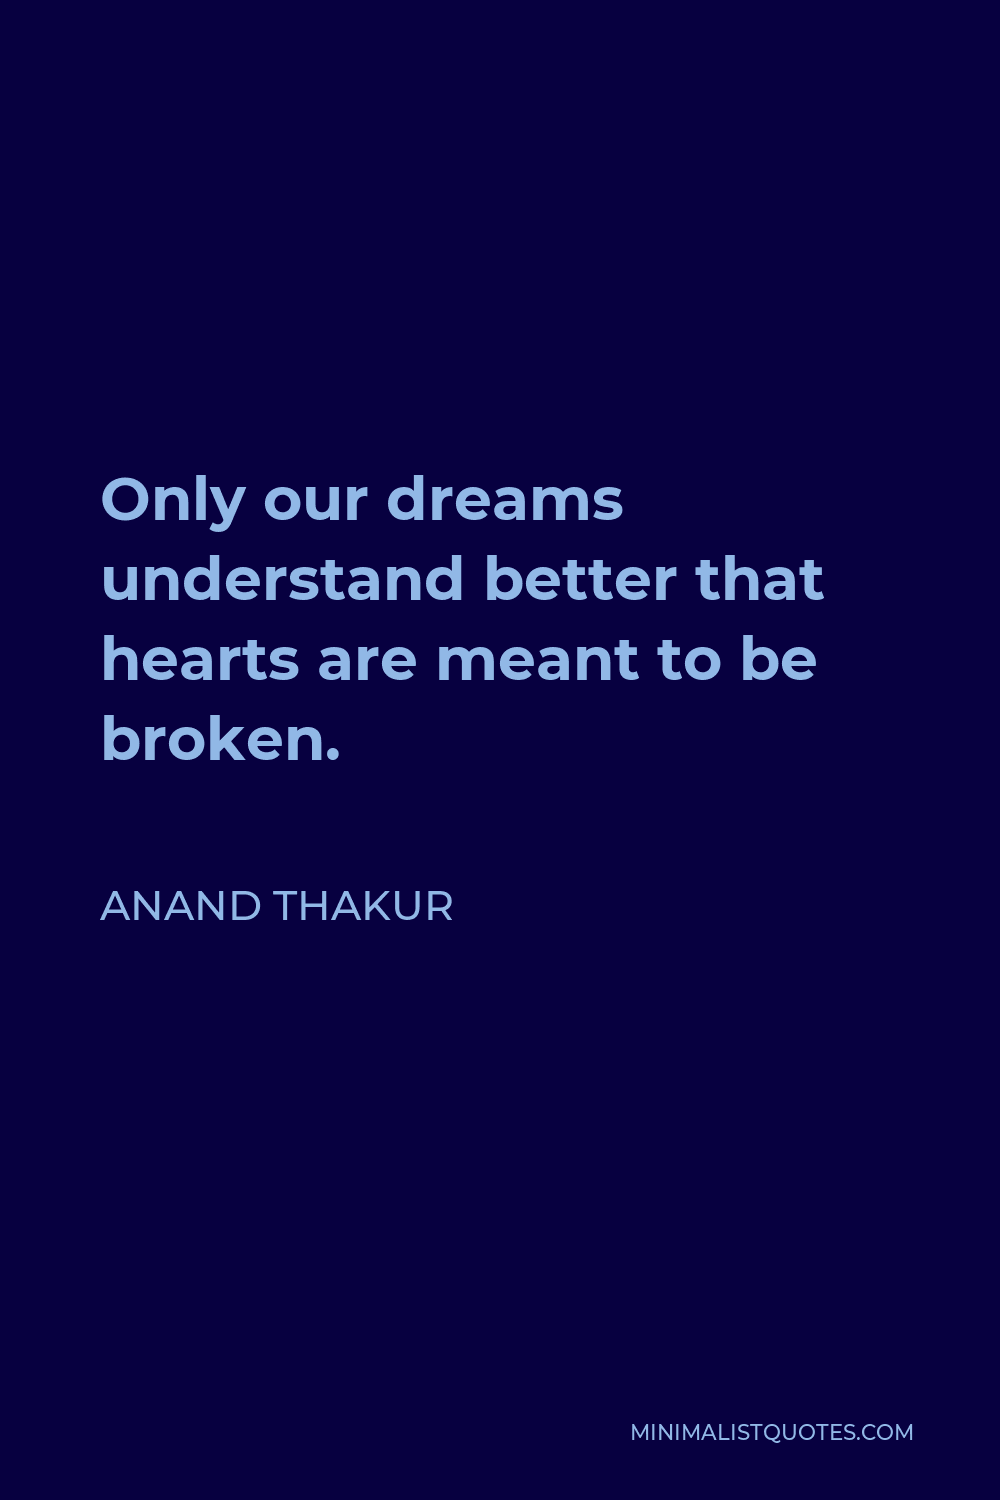 Anand Thakur Quote - Only our dreams understand better that hearts are meant to be broken.